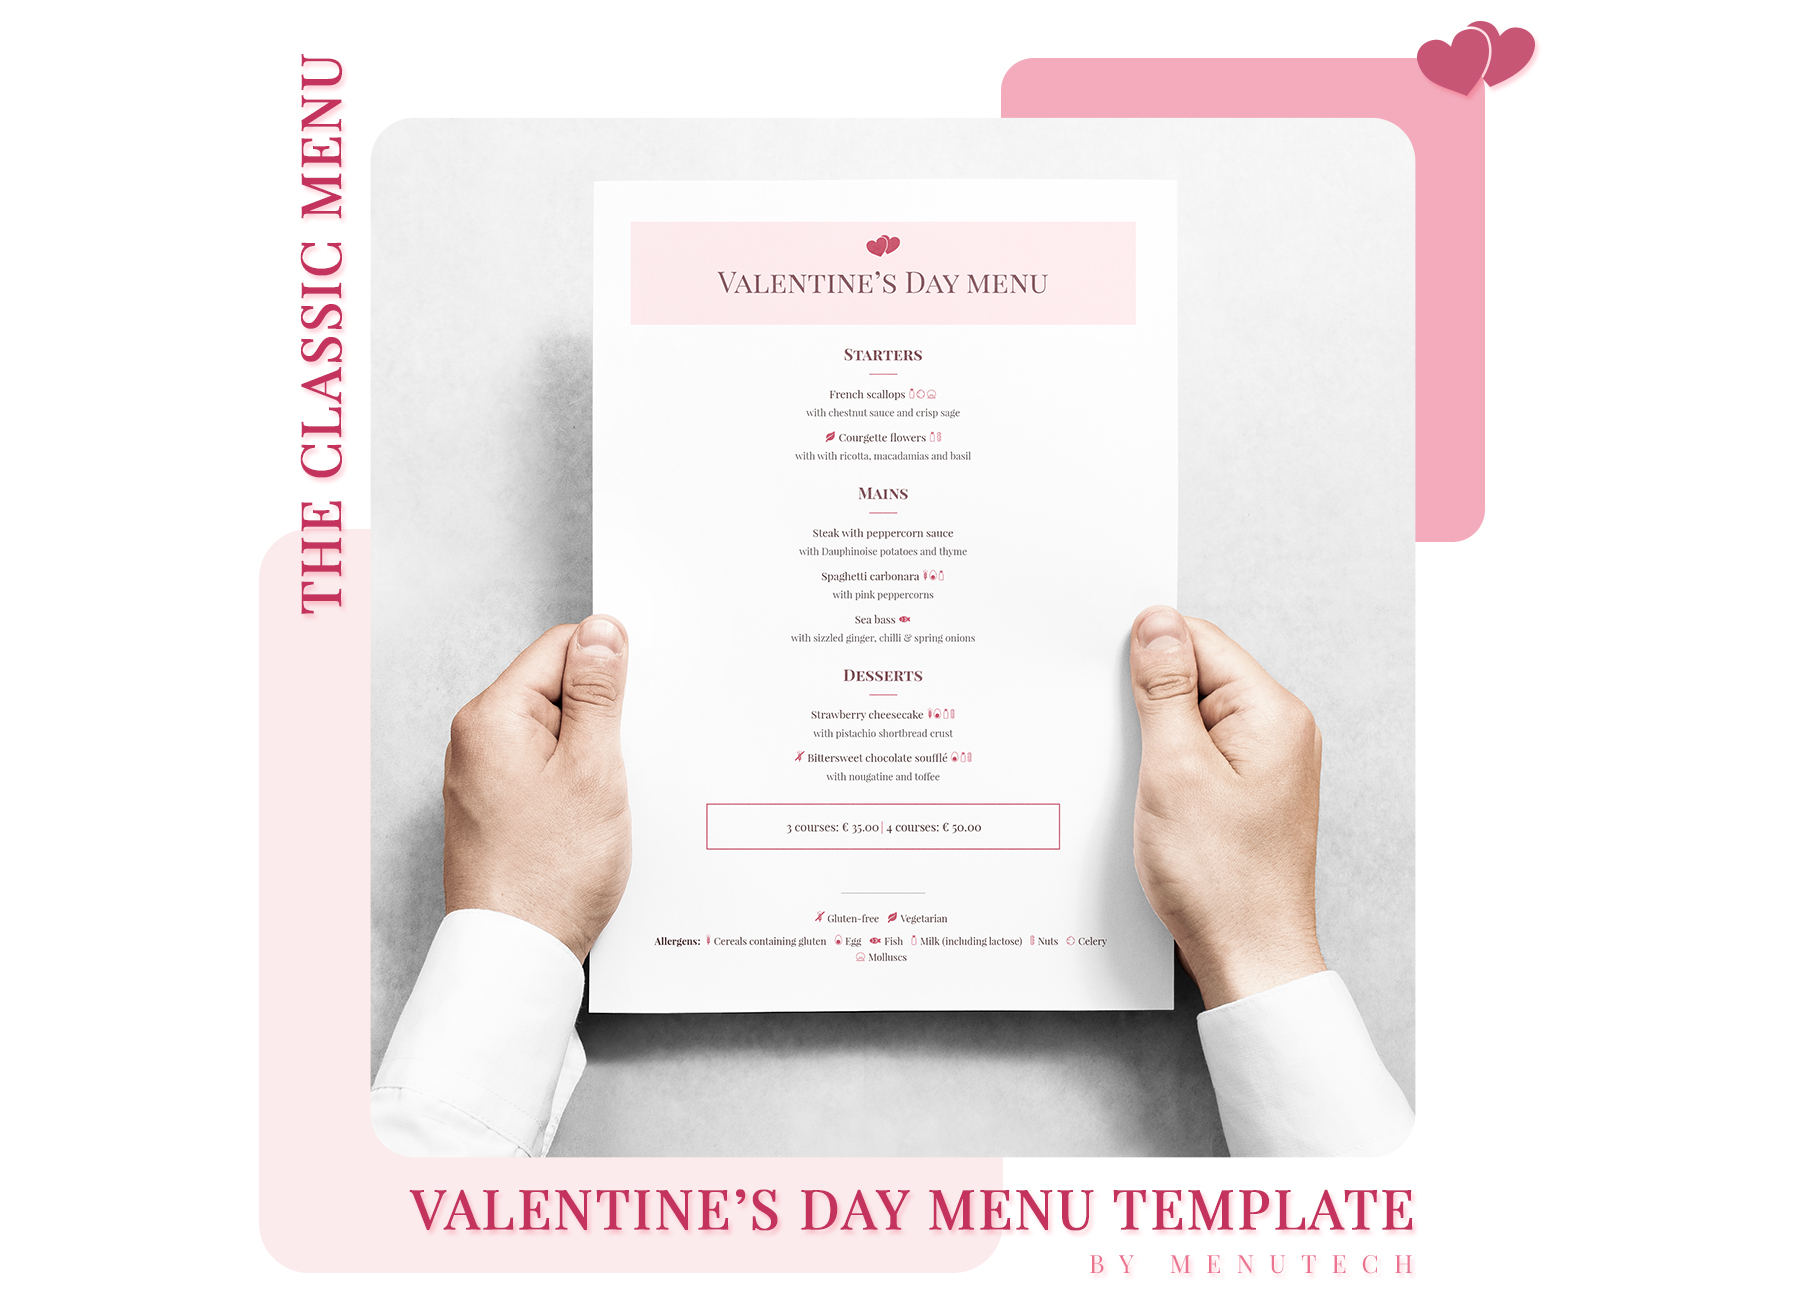 22 examples of menus with allergens for Valentine